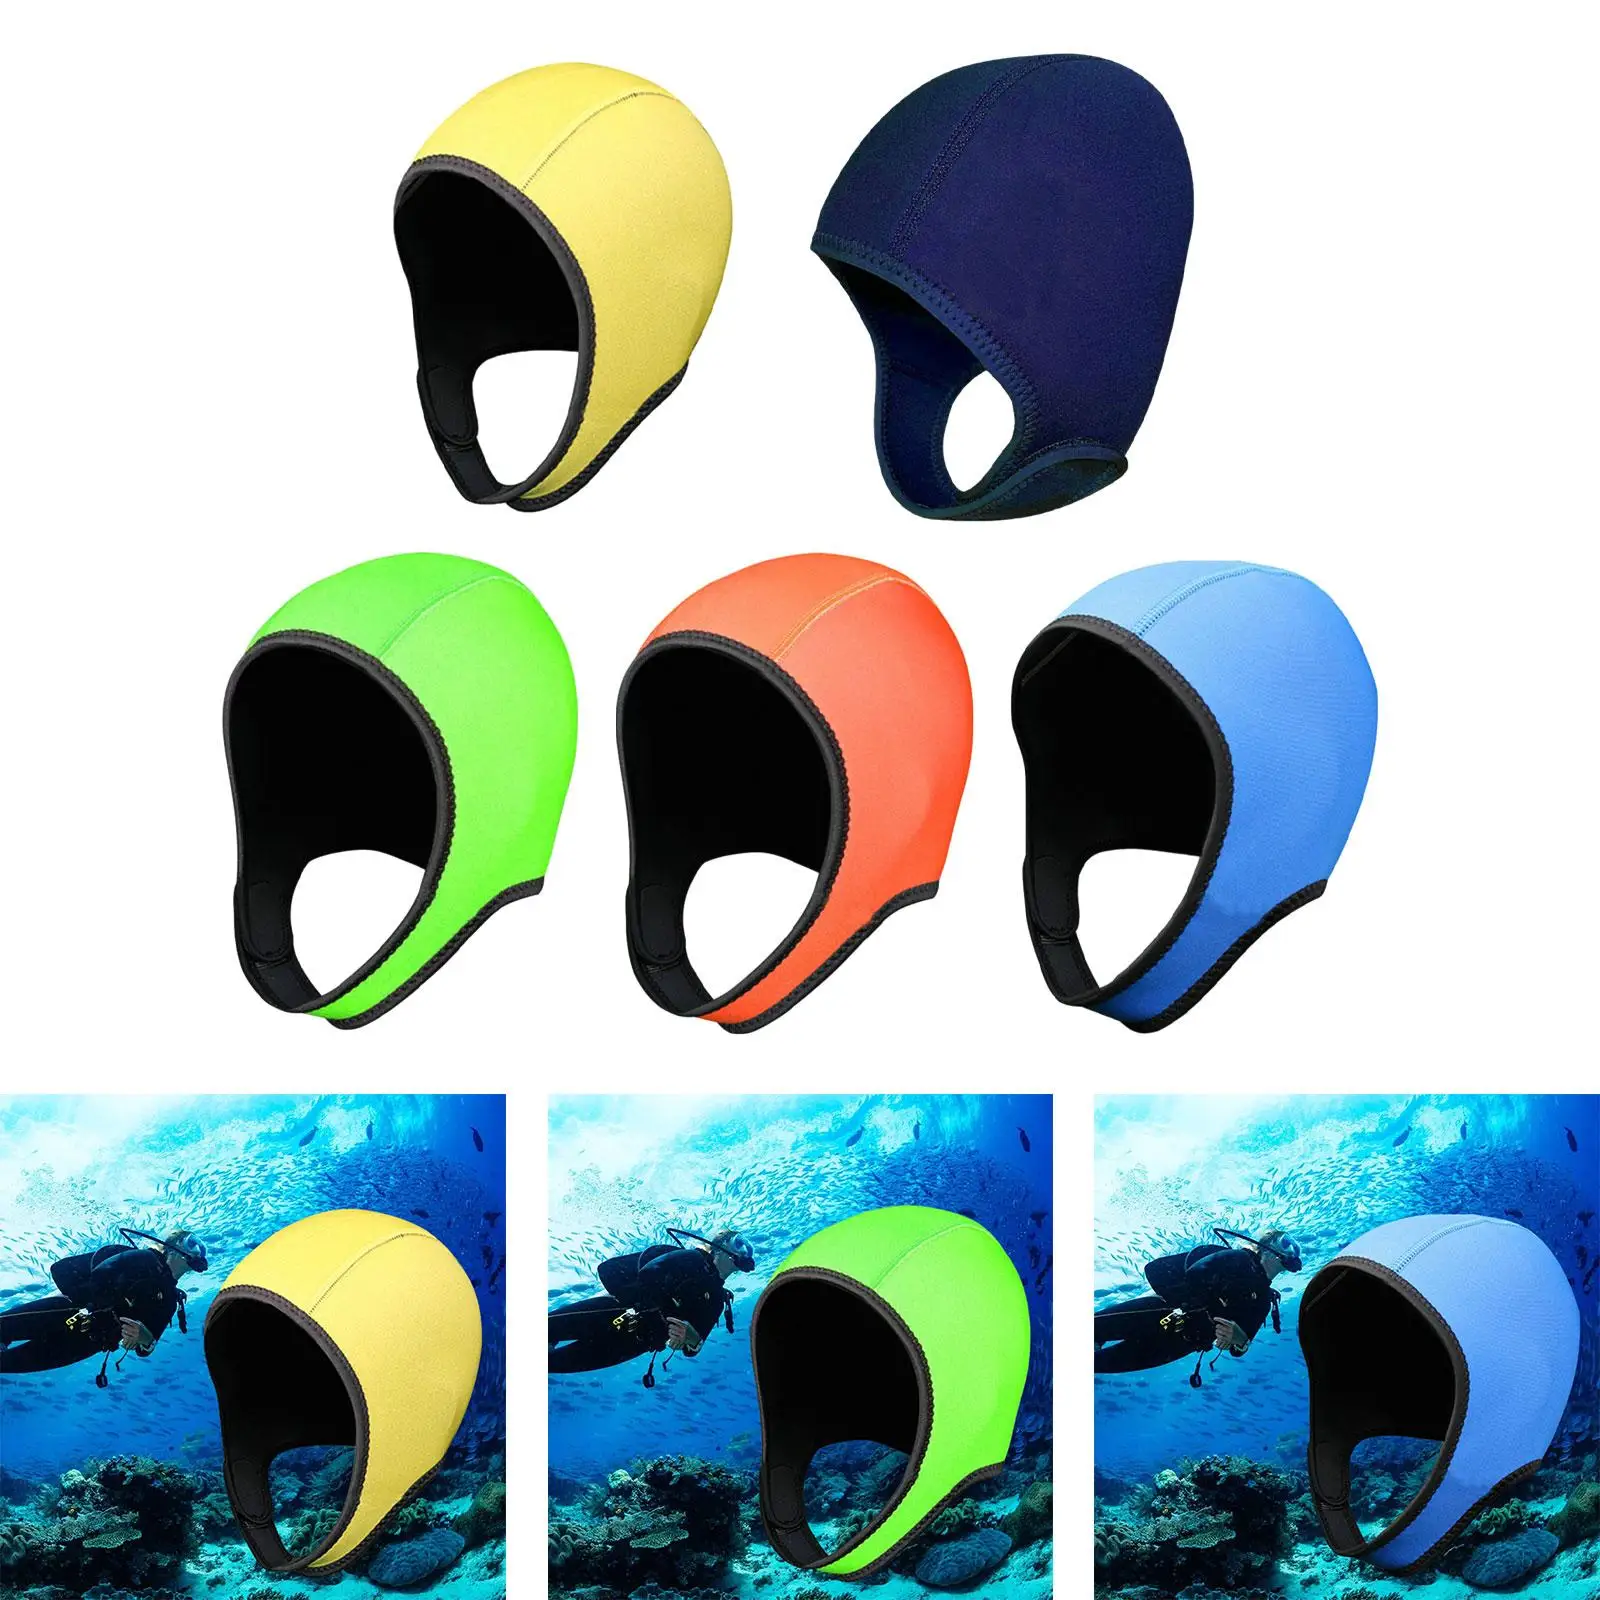 Diving Hood Swim Hat, Neoprene Wetsuit Hood Headgear with Chin Strap, Swimming Cap Thermal Hood, for Swimming Surfing Rafting